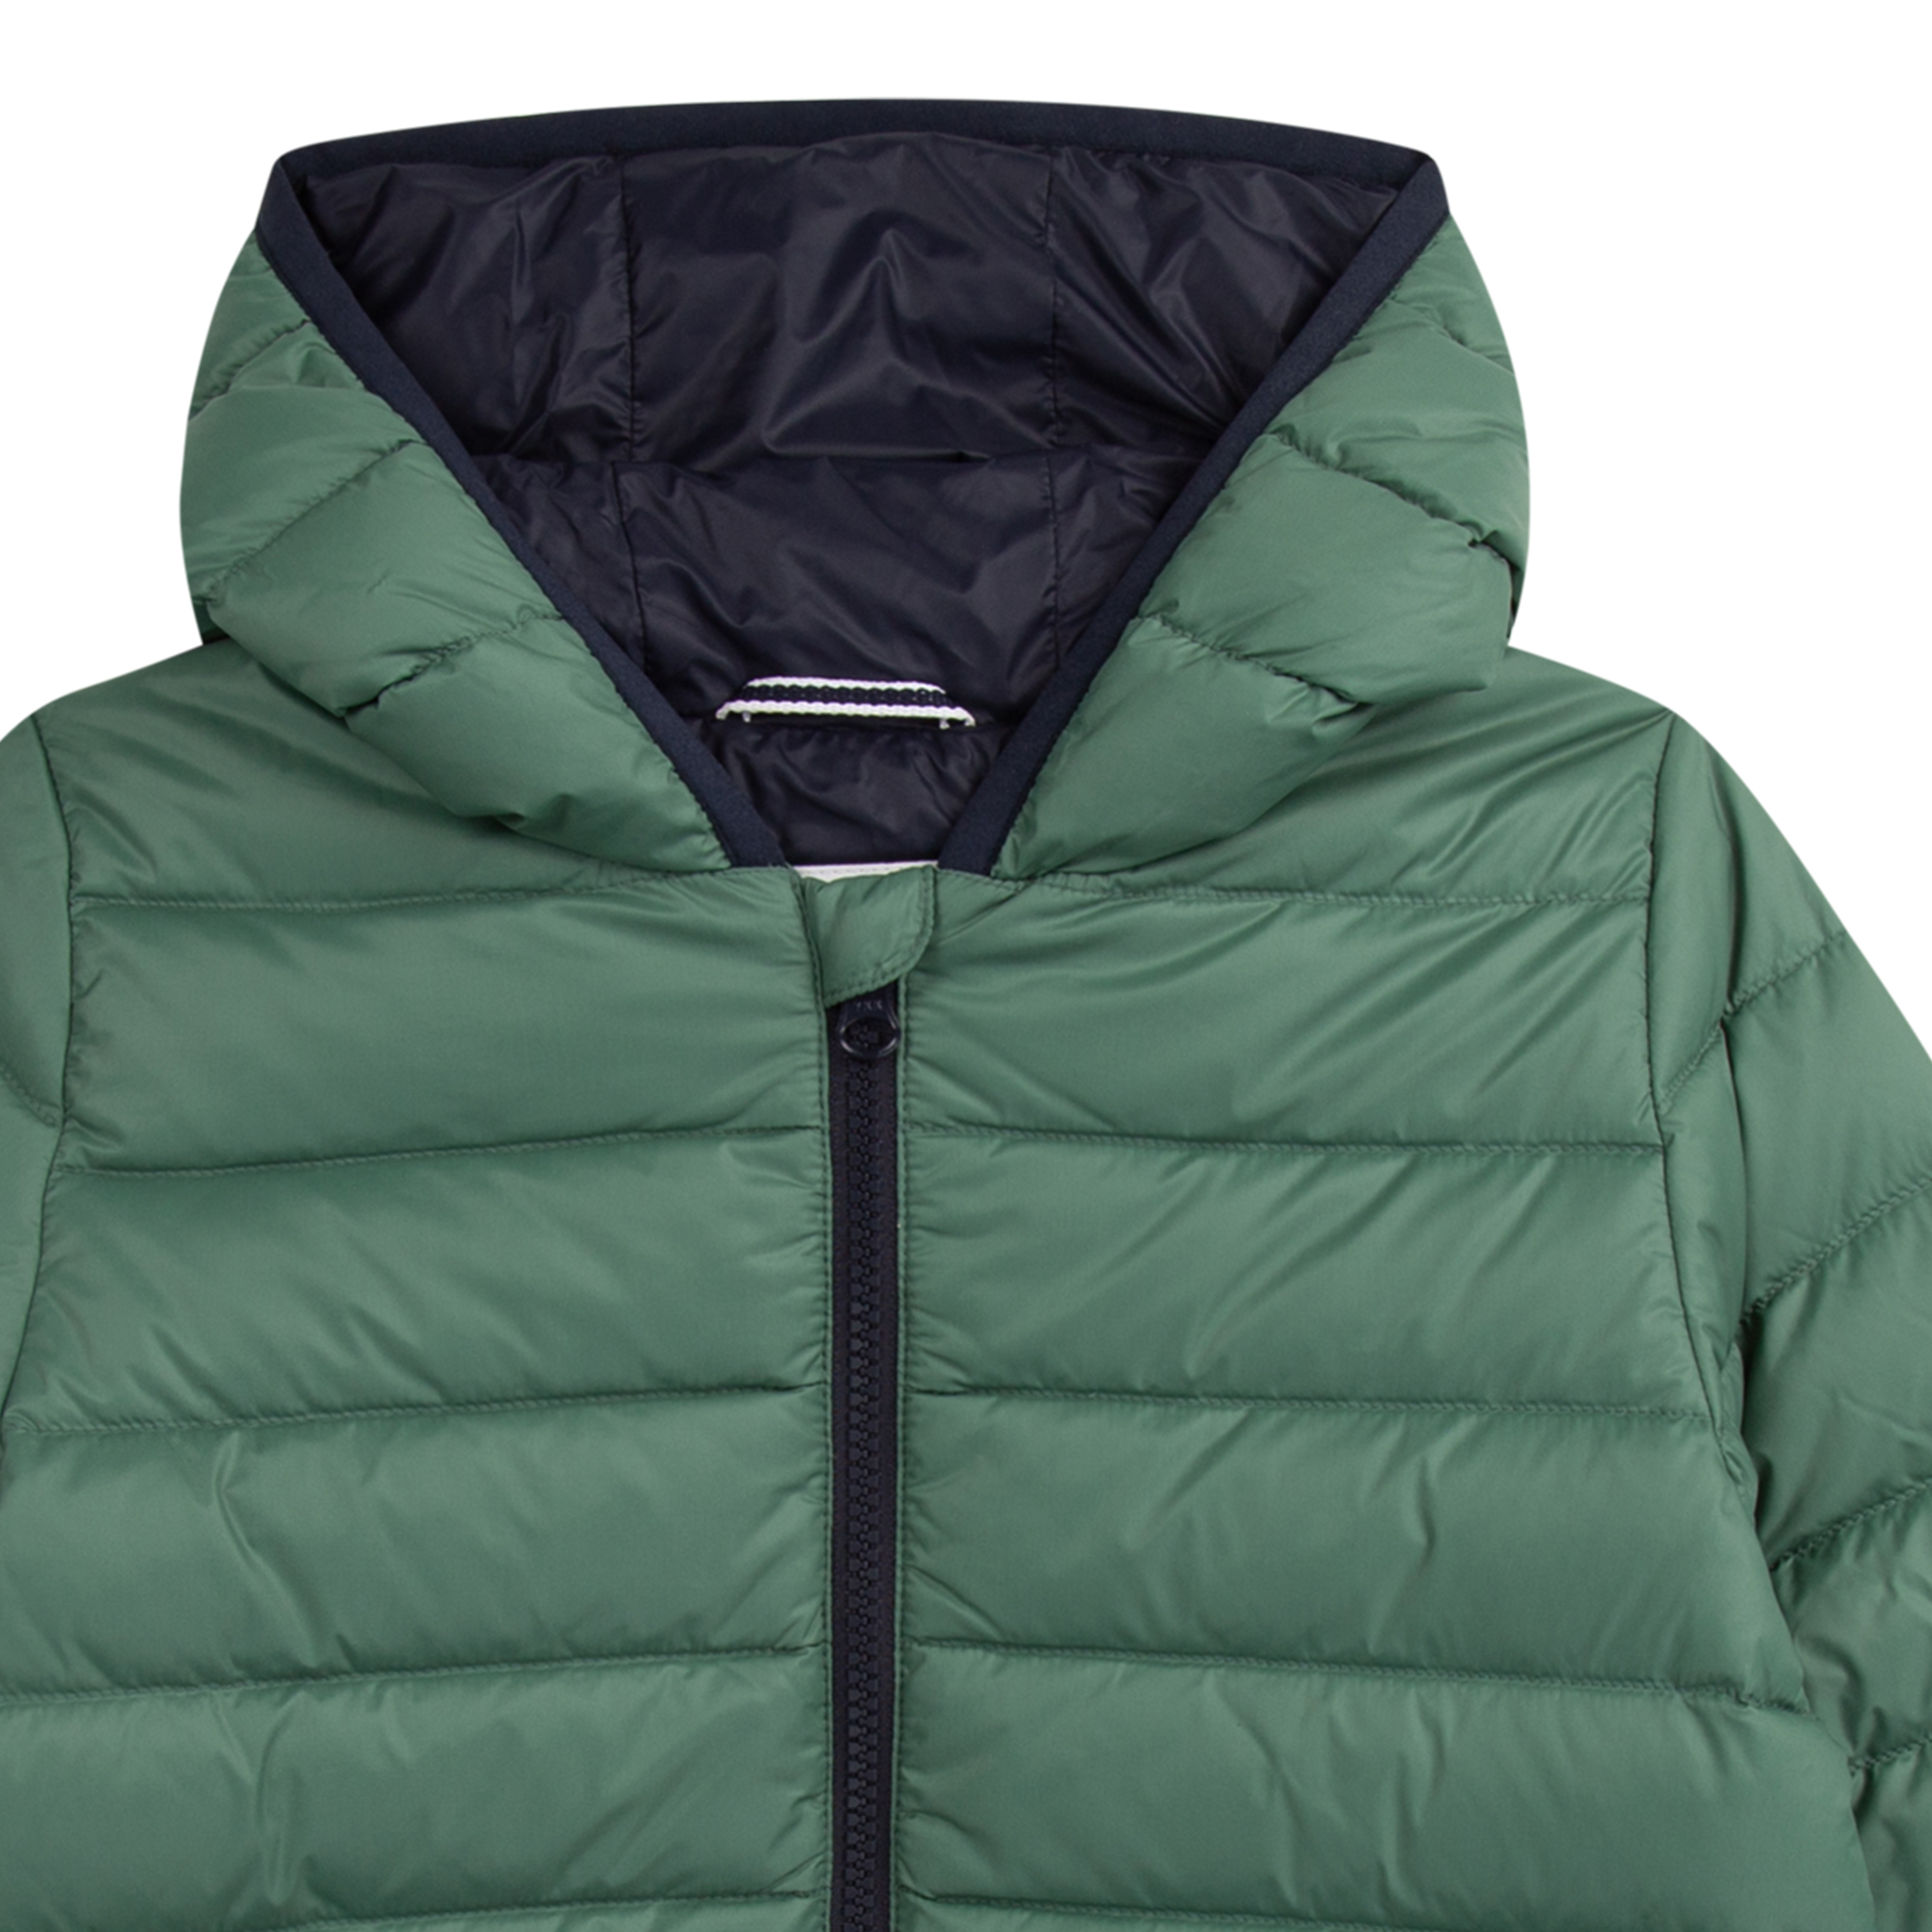 Hooded puffer jacket AIGLE for UNISEX